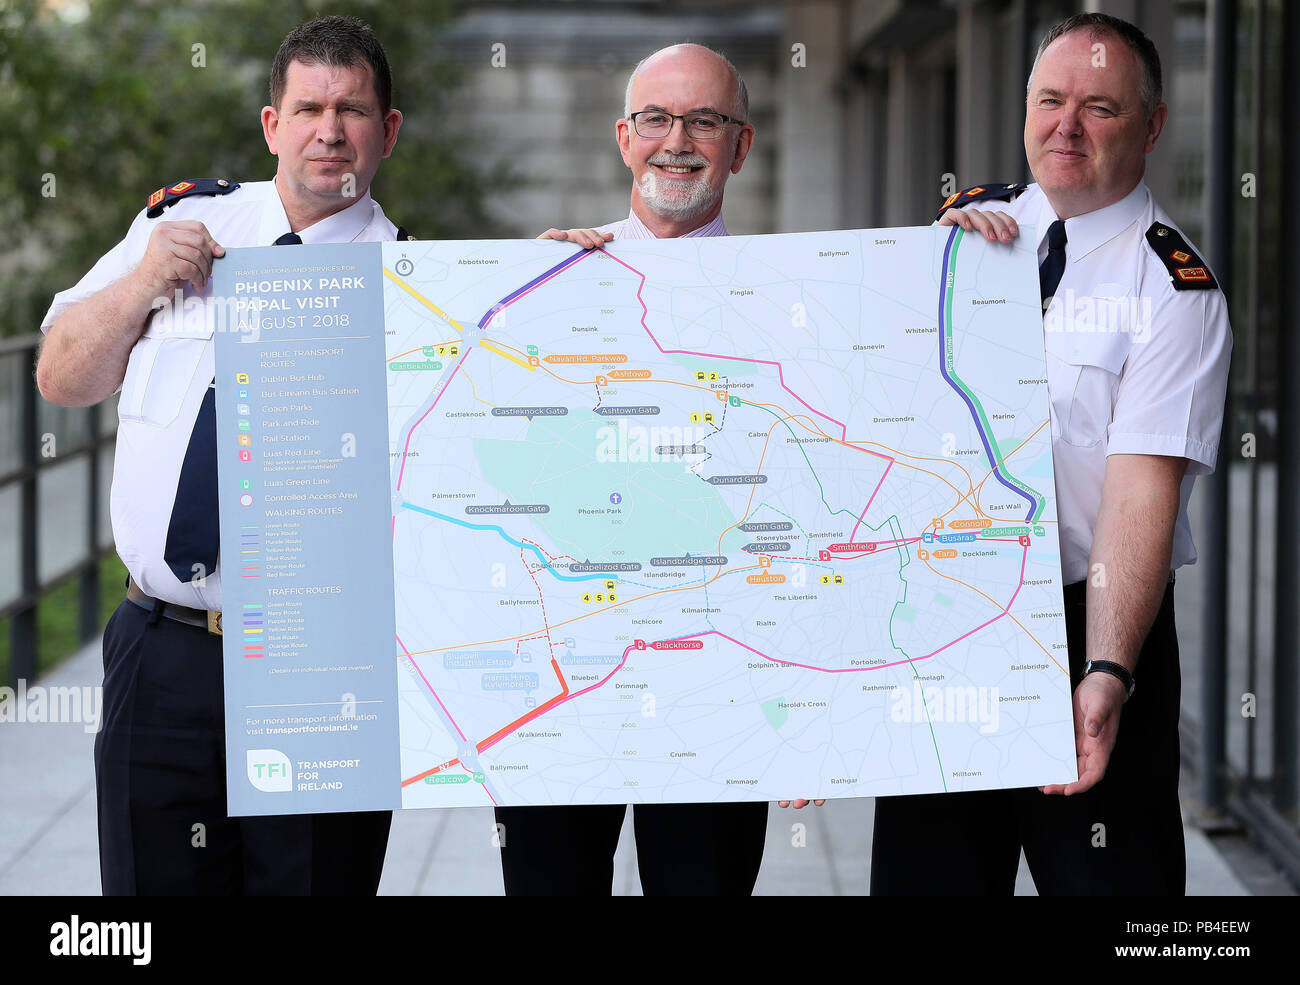 Tim Gaston, National Transport Authority (centre) with Superintendent Tom Calvey (left) and Superintendent Tom Murphy during a briefing in relation to public safety and transport information concerning the visit of Pope Francis to Ireland next month, the first papal visit to Ireland since 1979. Stock Photo